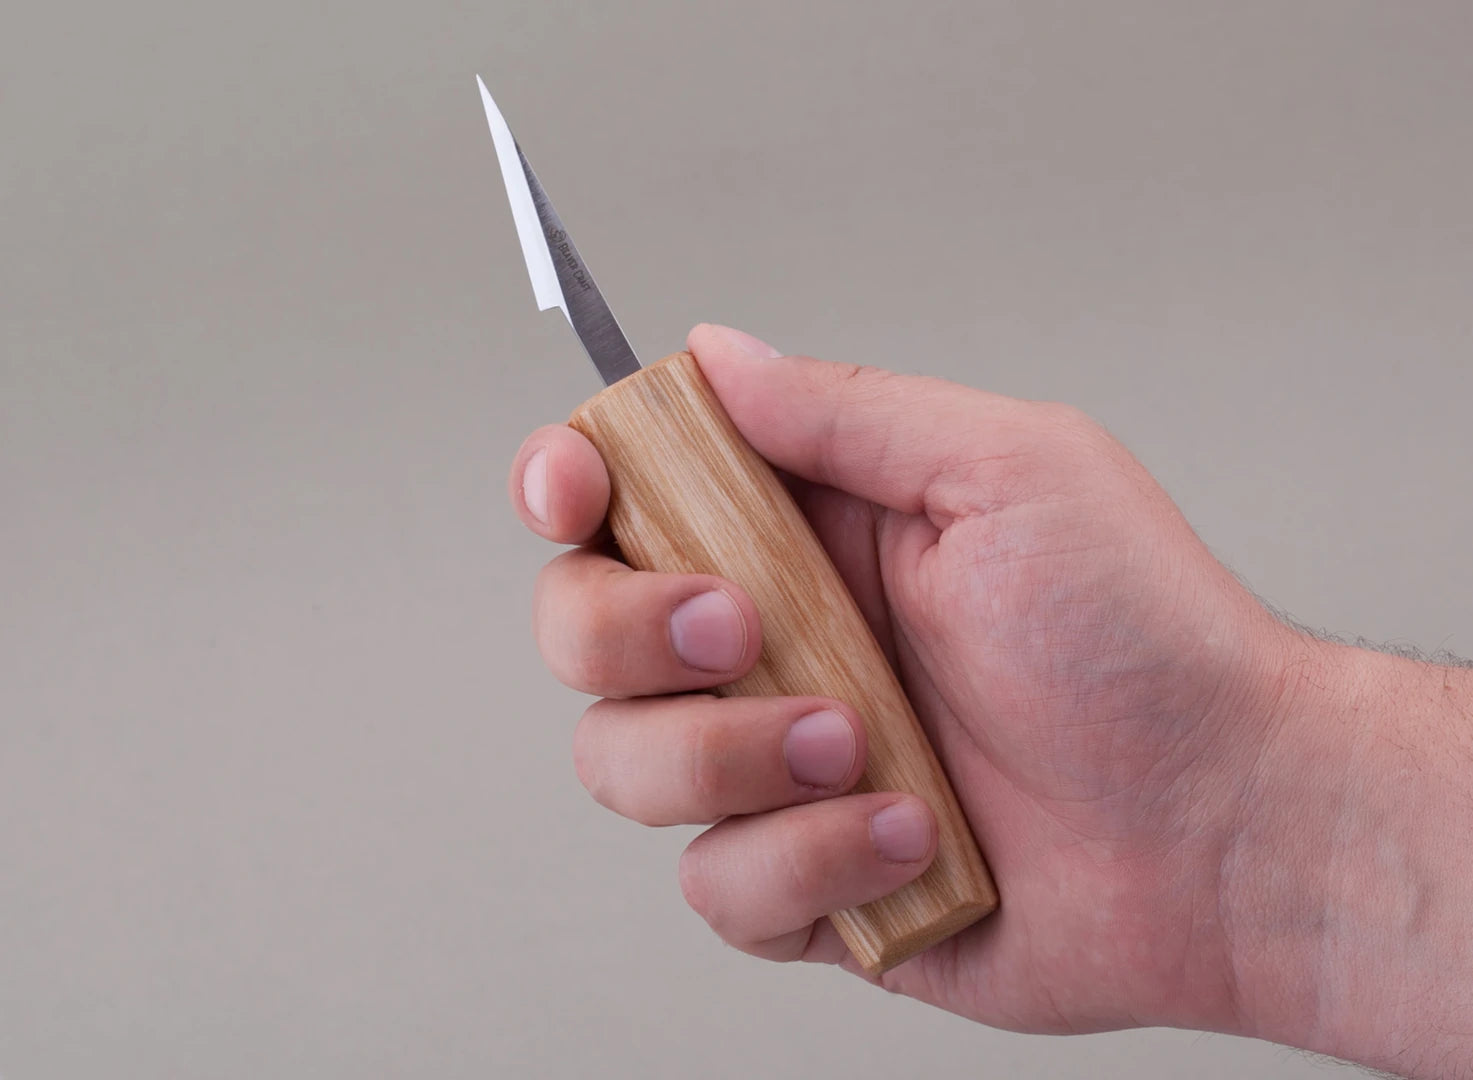 C7 - Small Detail Wood Carving Knife